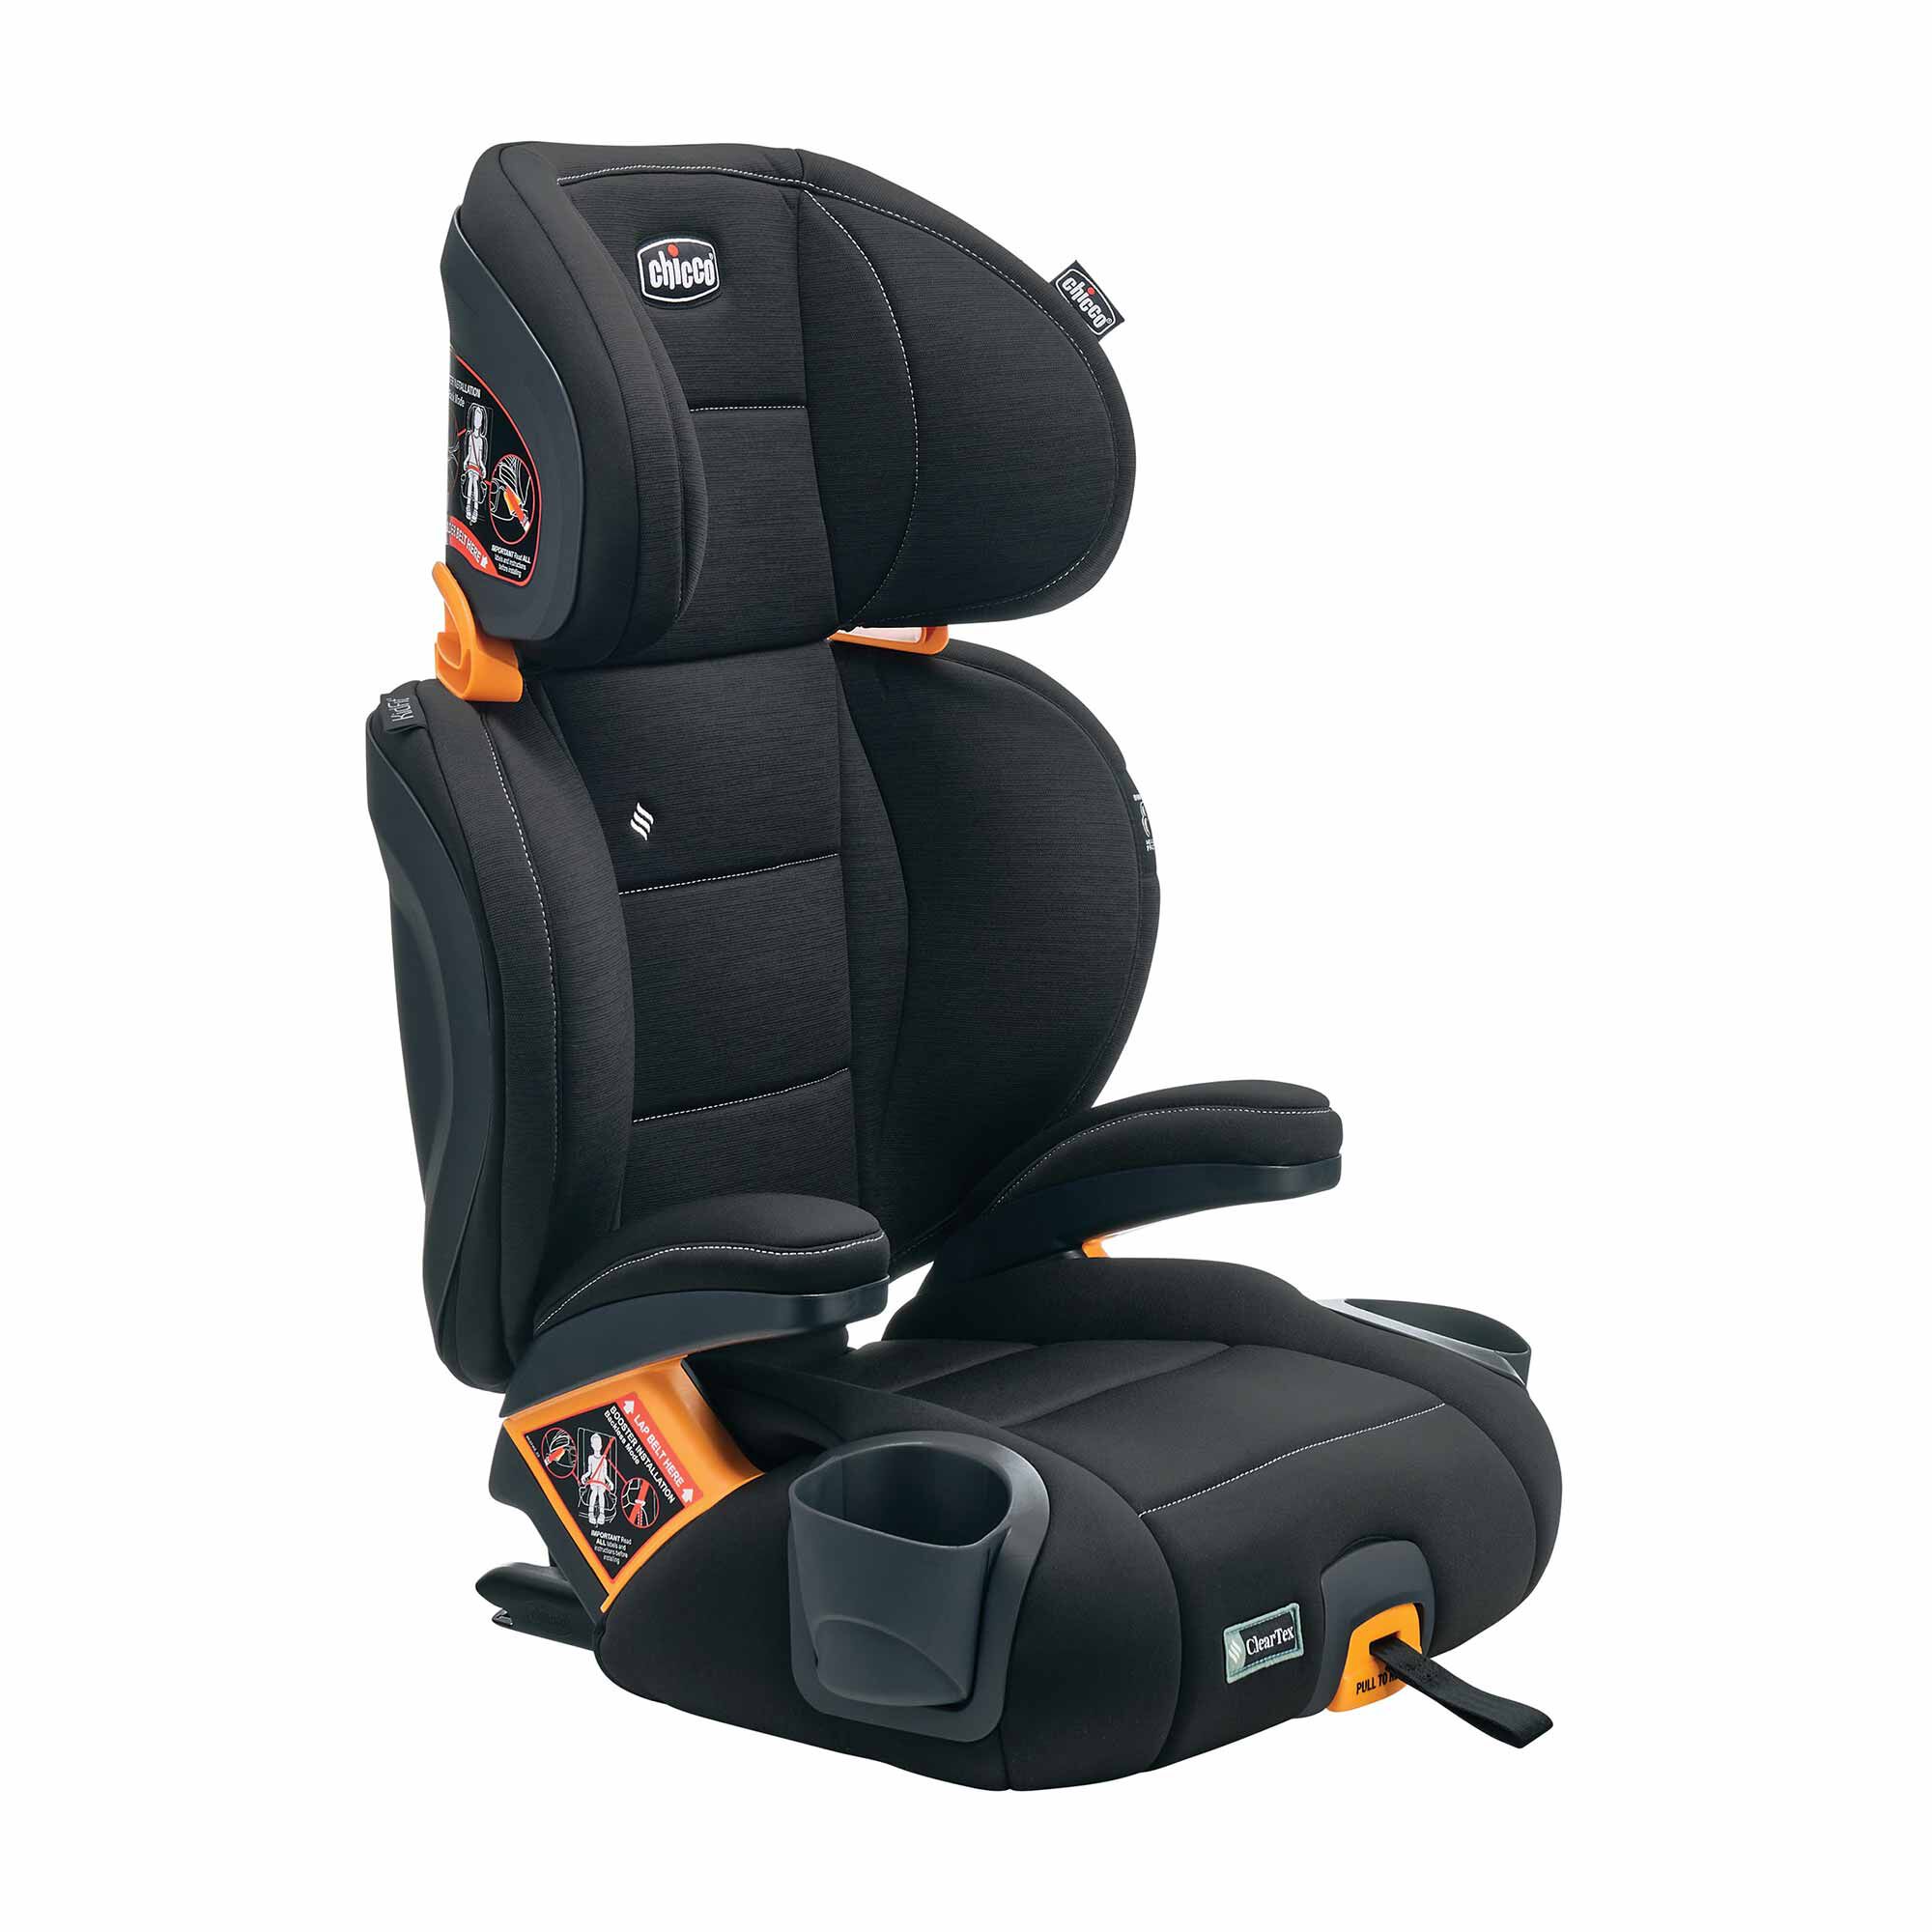 KidFit ClearTex Plus 2-in-1 Belt-Positioning Car | Chicco - Obsidian Booster Seat